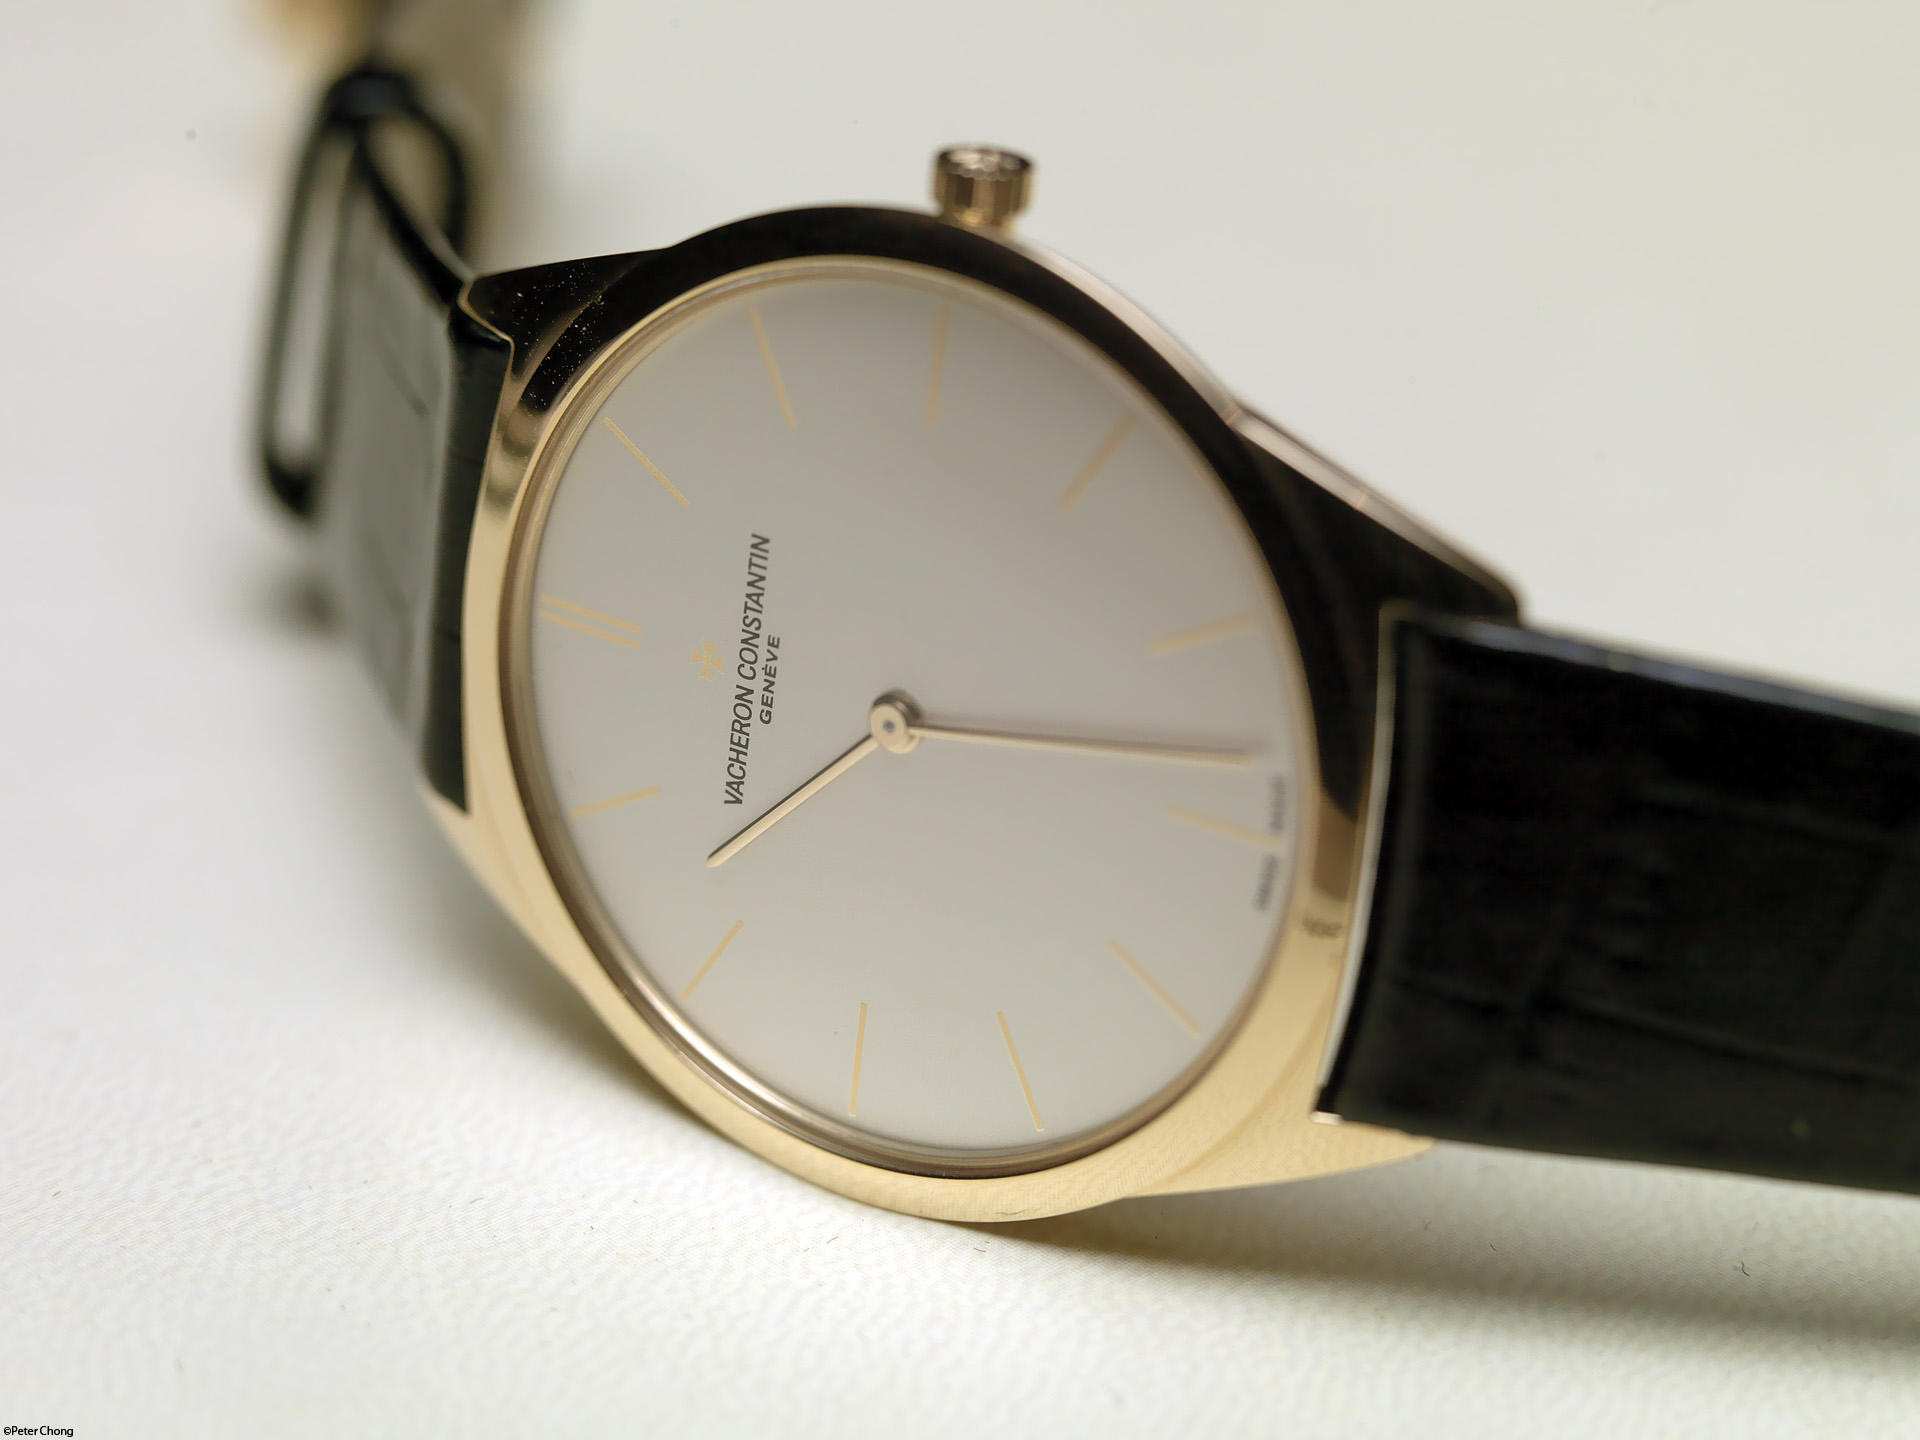 A simple dress watch, like this Vacheron Constantin Historique Ultra-Fine 1955, is rather timeless and classical.